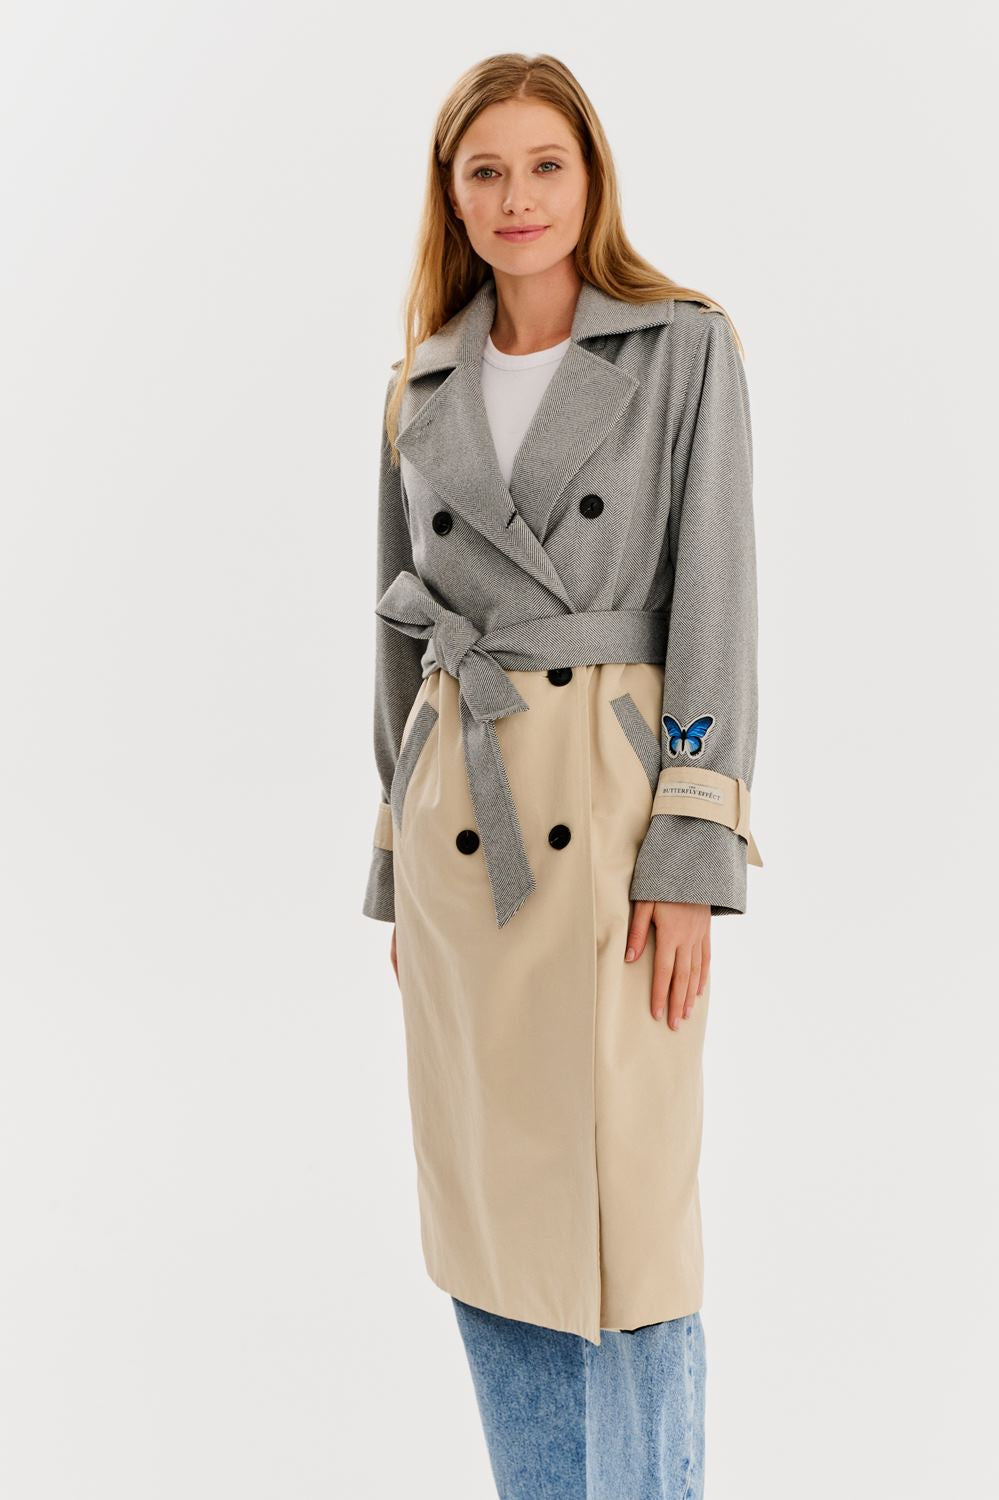 The Butterfly Effect's classic trench